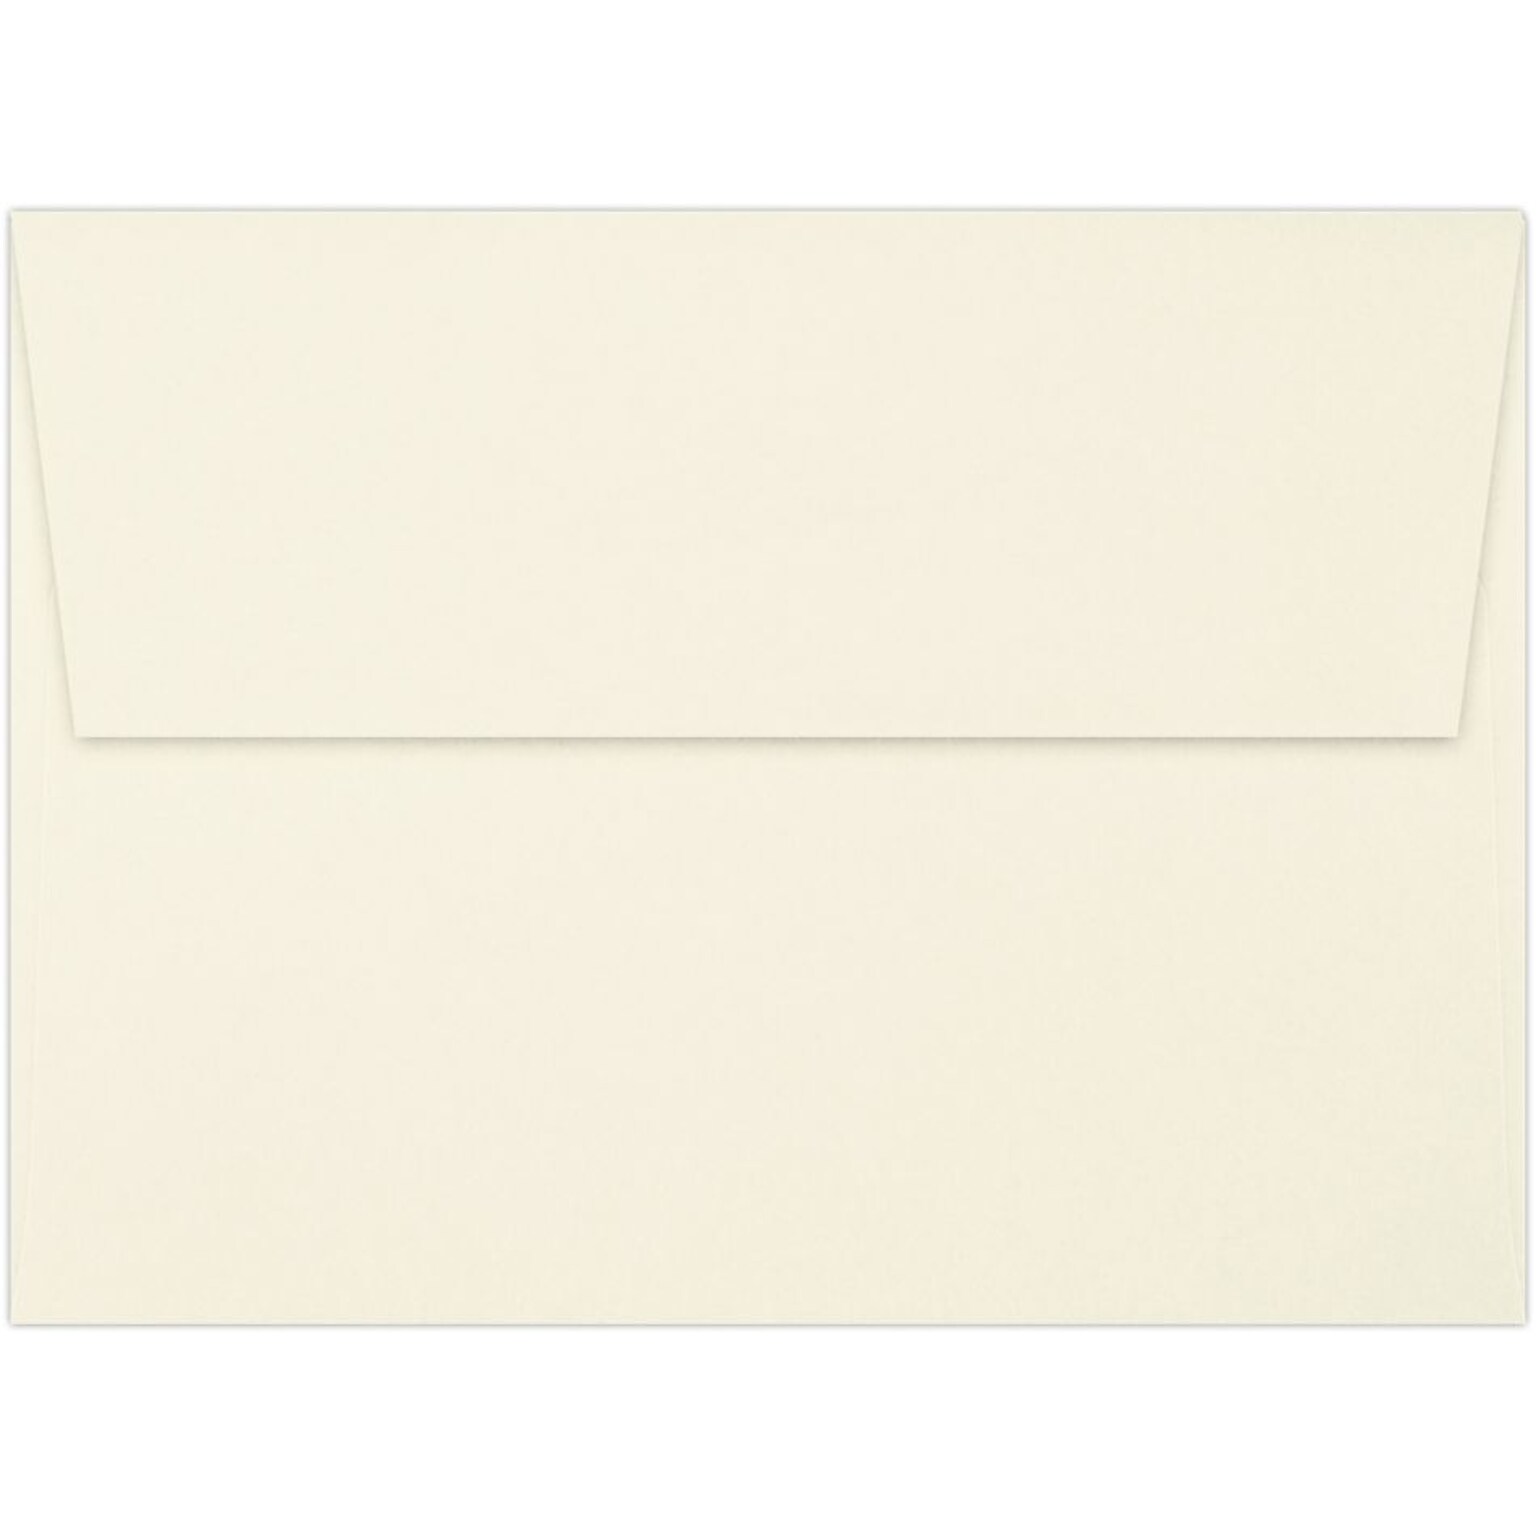 LUX A7 Invitation Envelopes (5 1/4 x 7 1/4) 250/Pack, Classic Linen® Baronial Ivory (4880-70BILI-250)